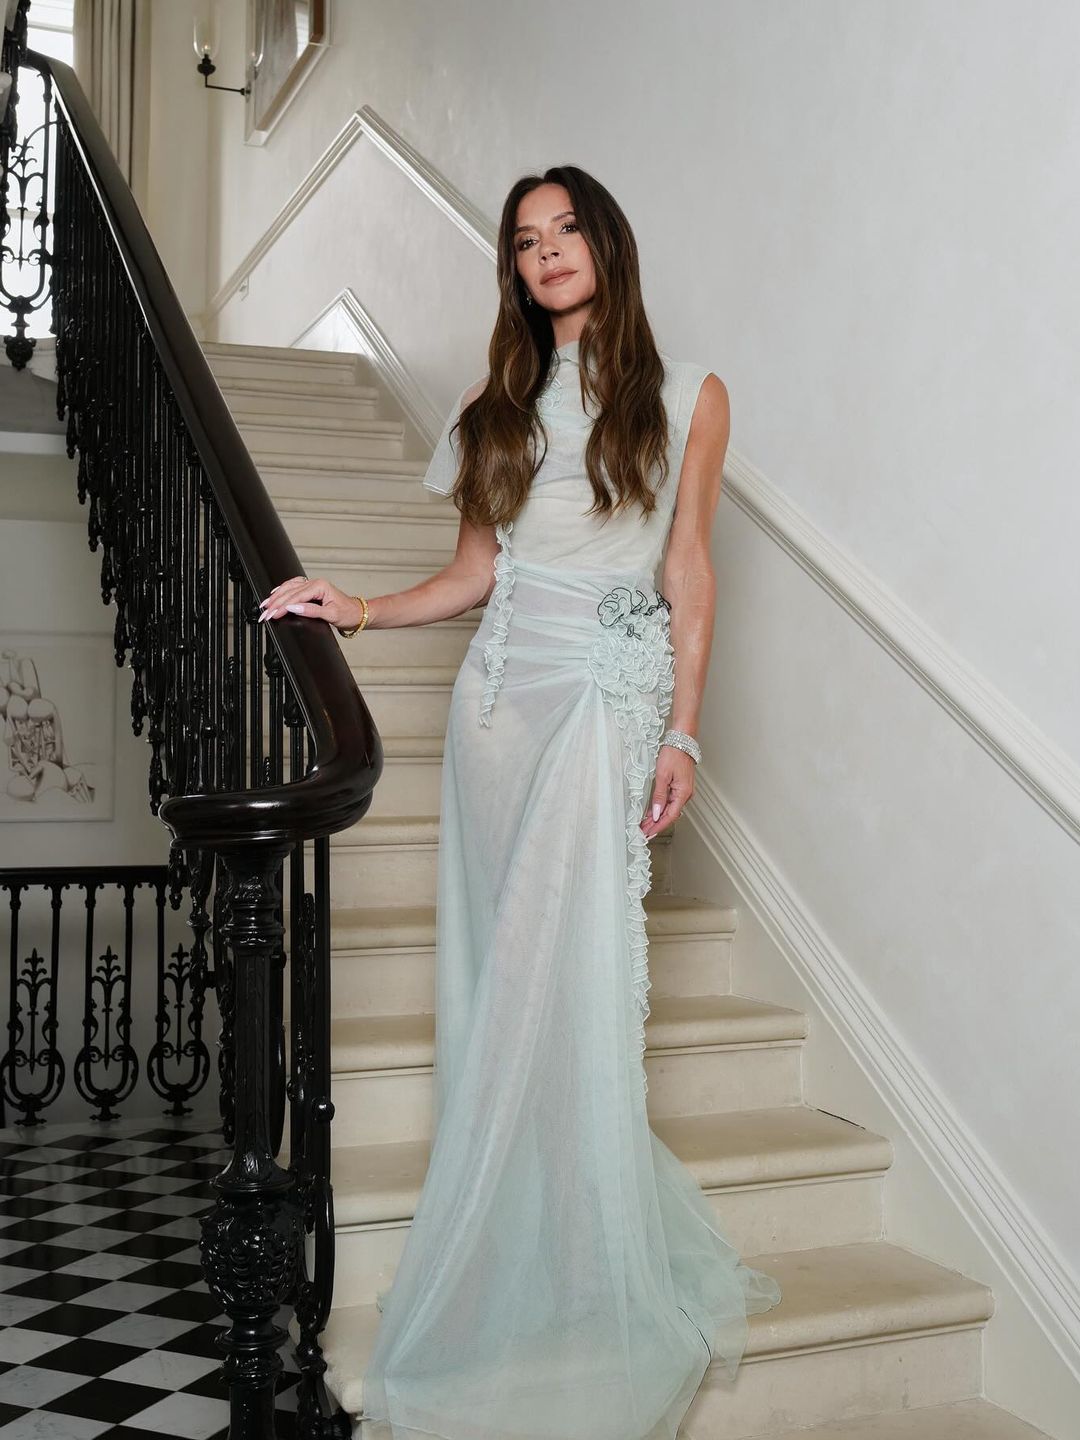 Victoria Beckham poses in a mint green sheer dress on a staircase